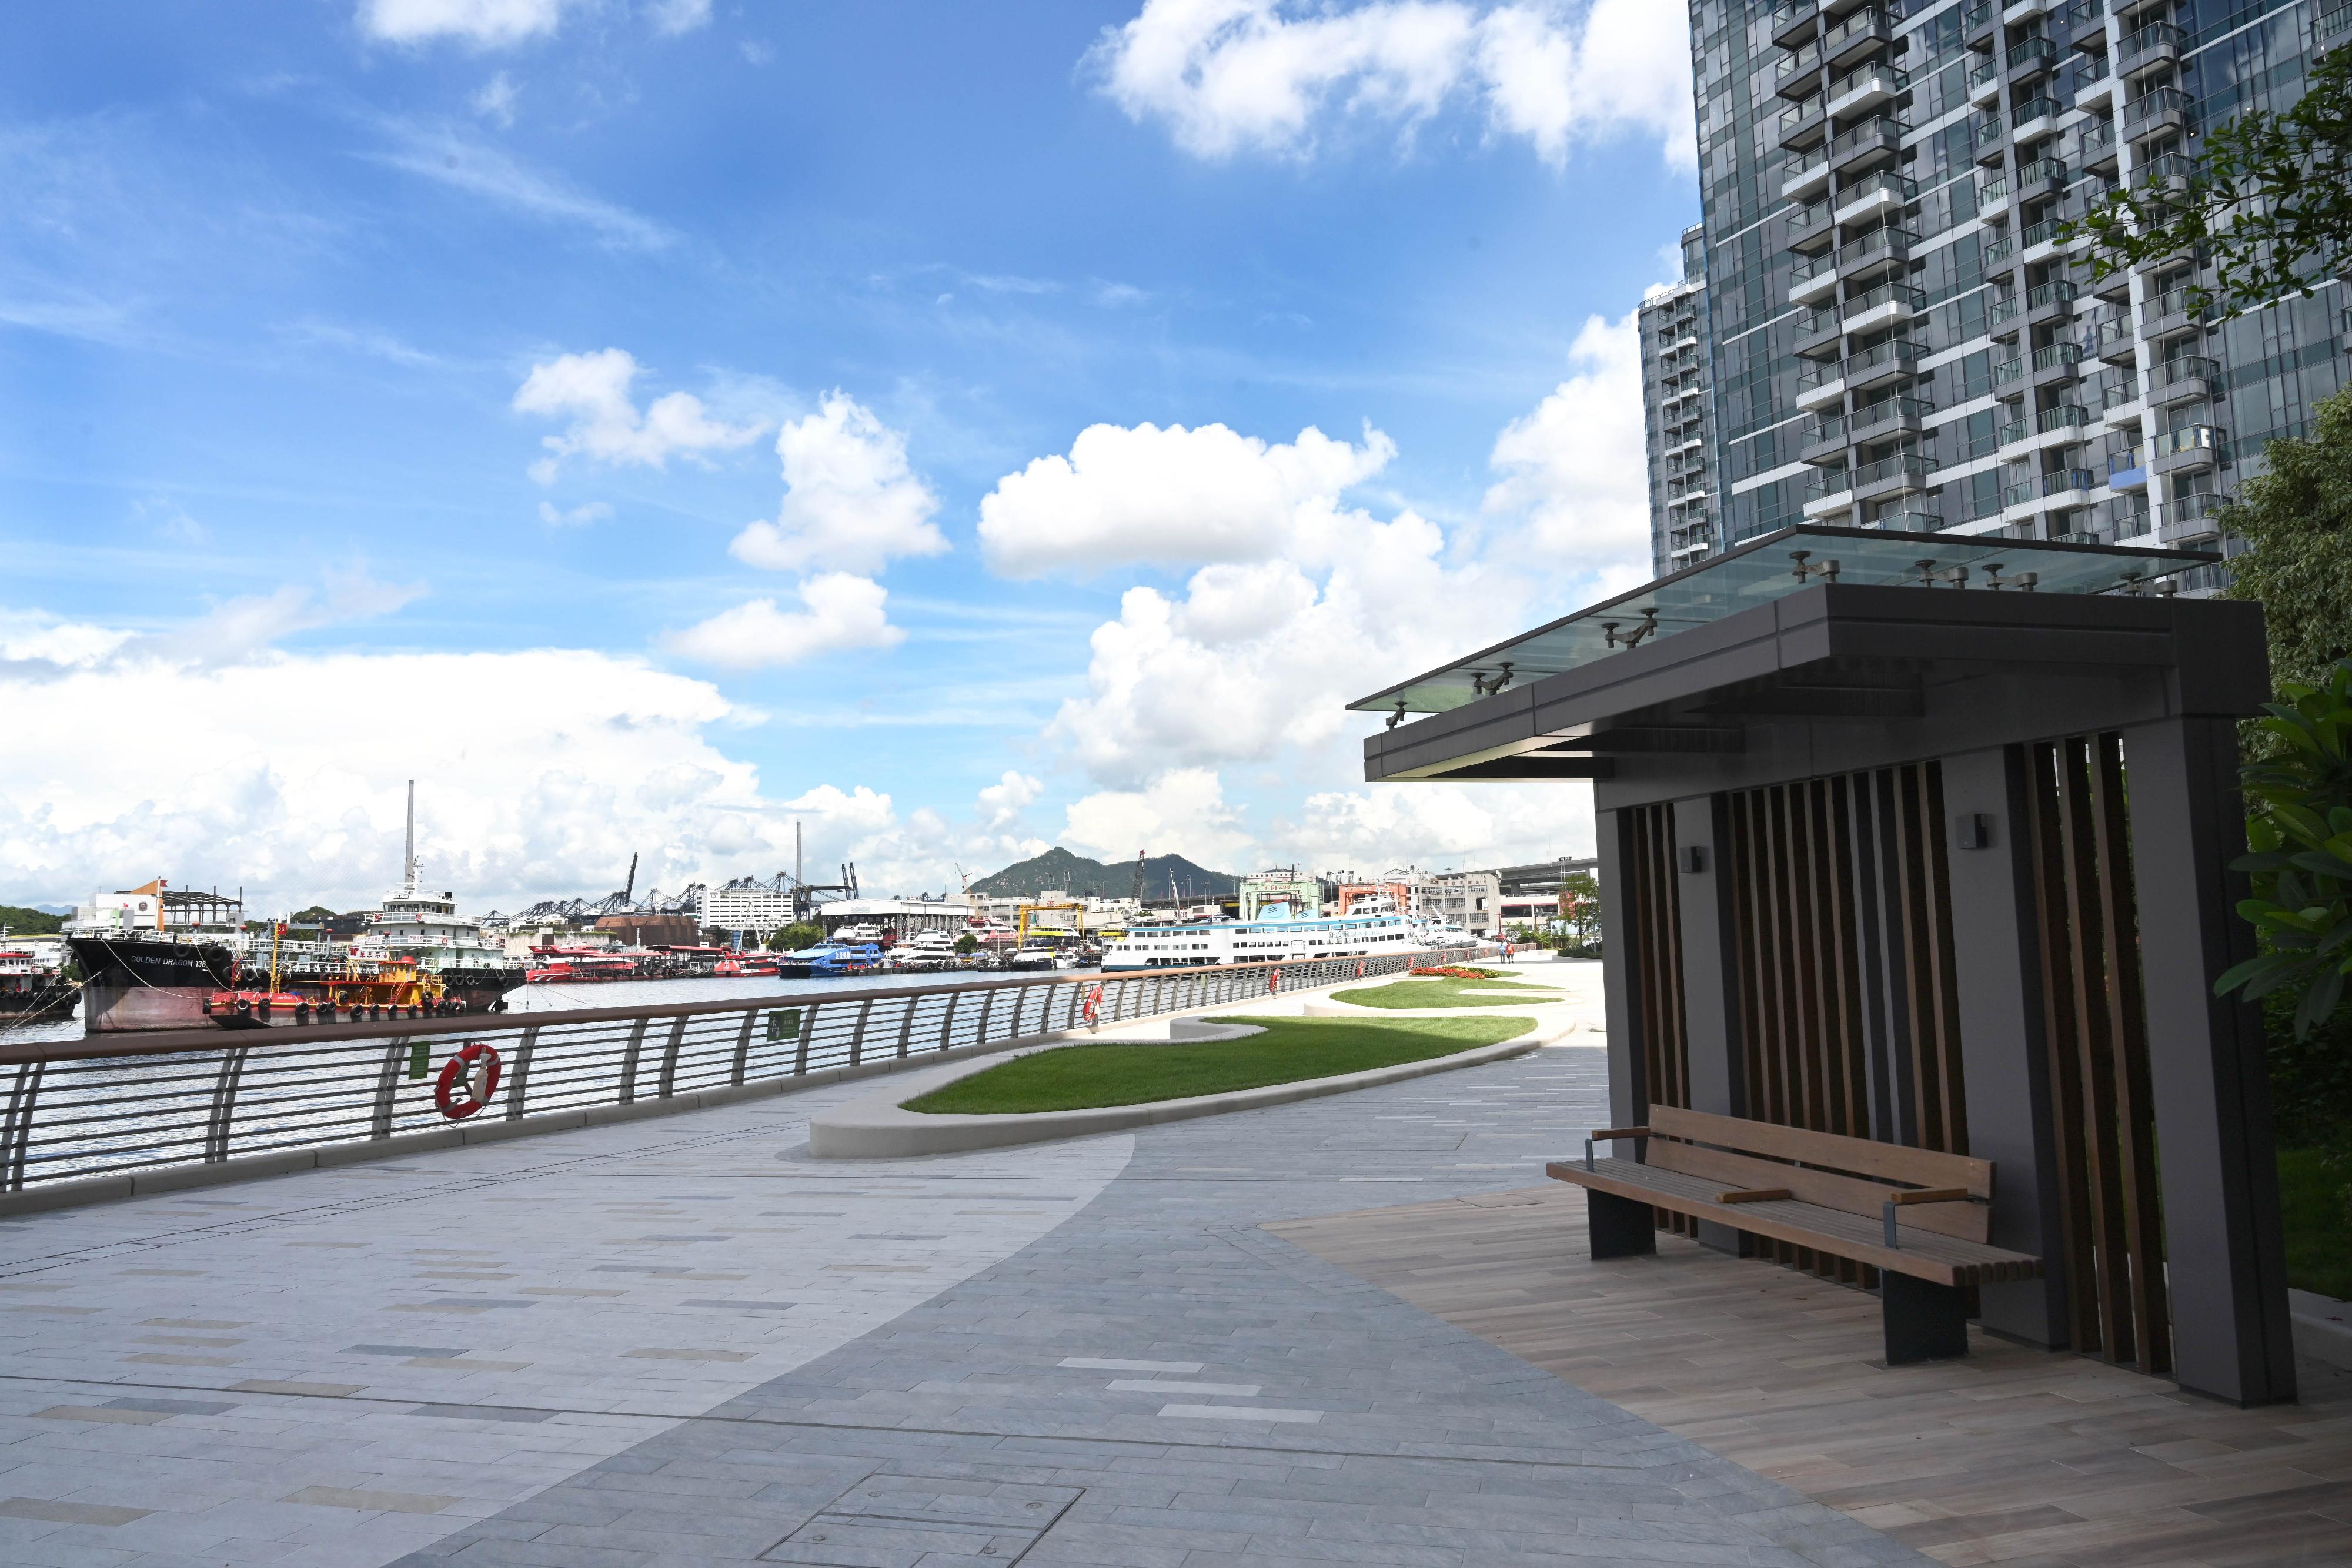 The Leisure and Cultural Services Department announced today (July 14) that the newly built Cheung Sha Wan Promenade is now fully opened for public use. Photo shows the waterfront promenade.